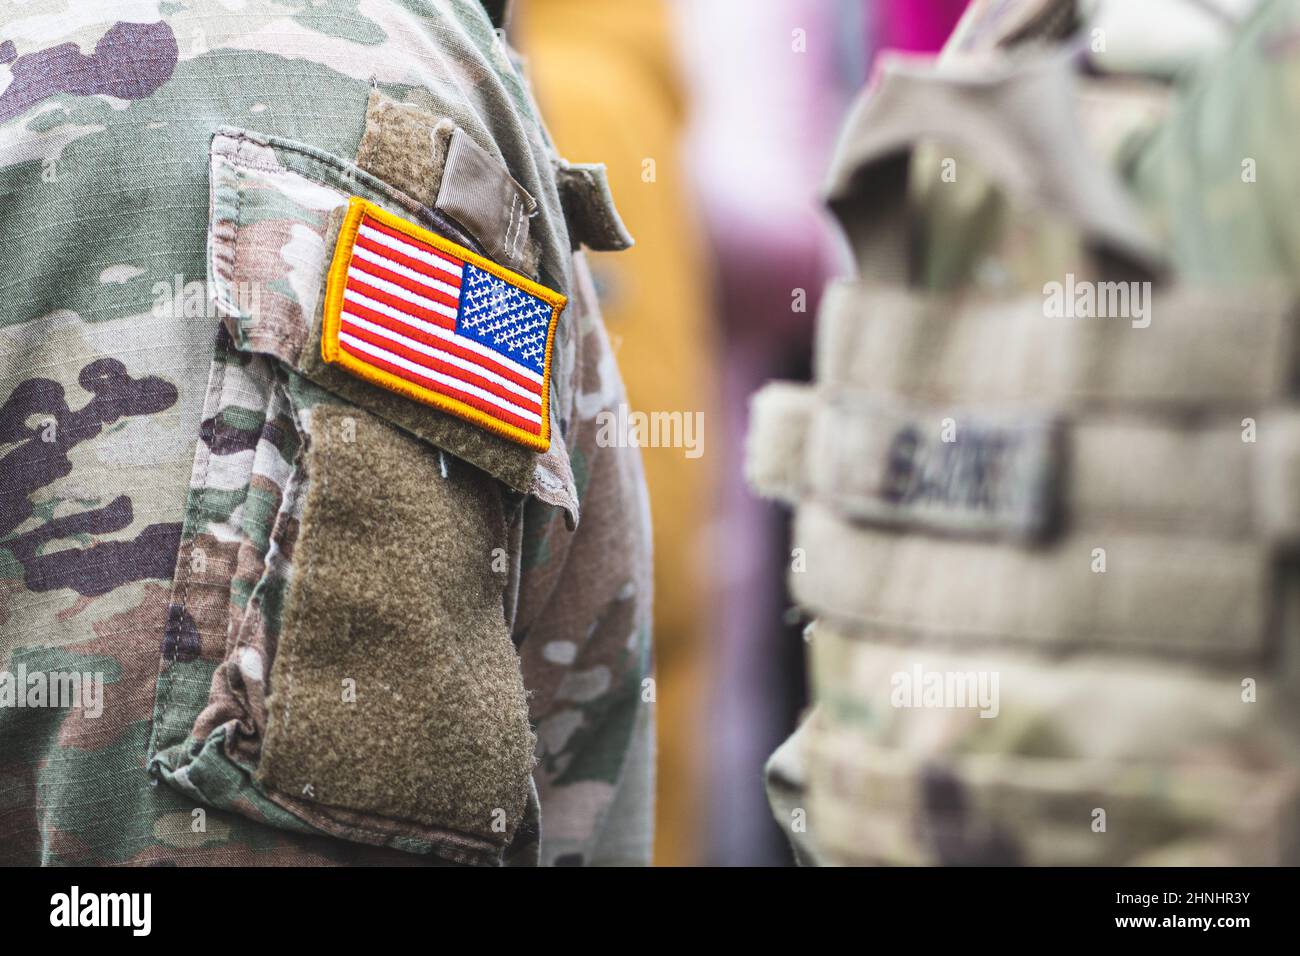 Flag of United States Marine Corps, USA or US army, on a soldier uniform Stock Photo